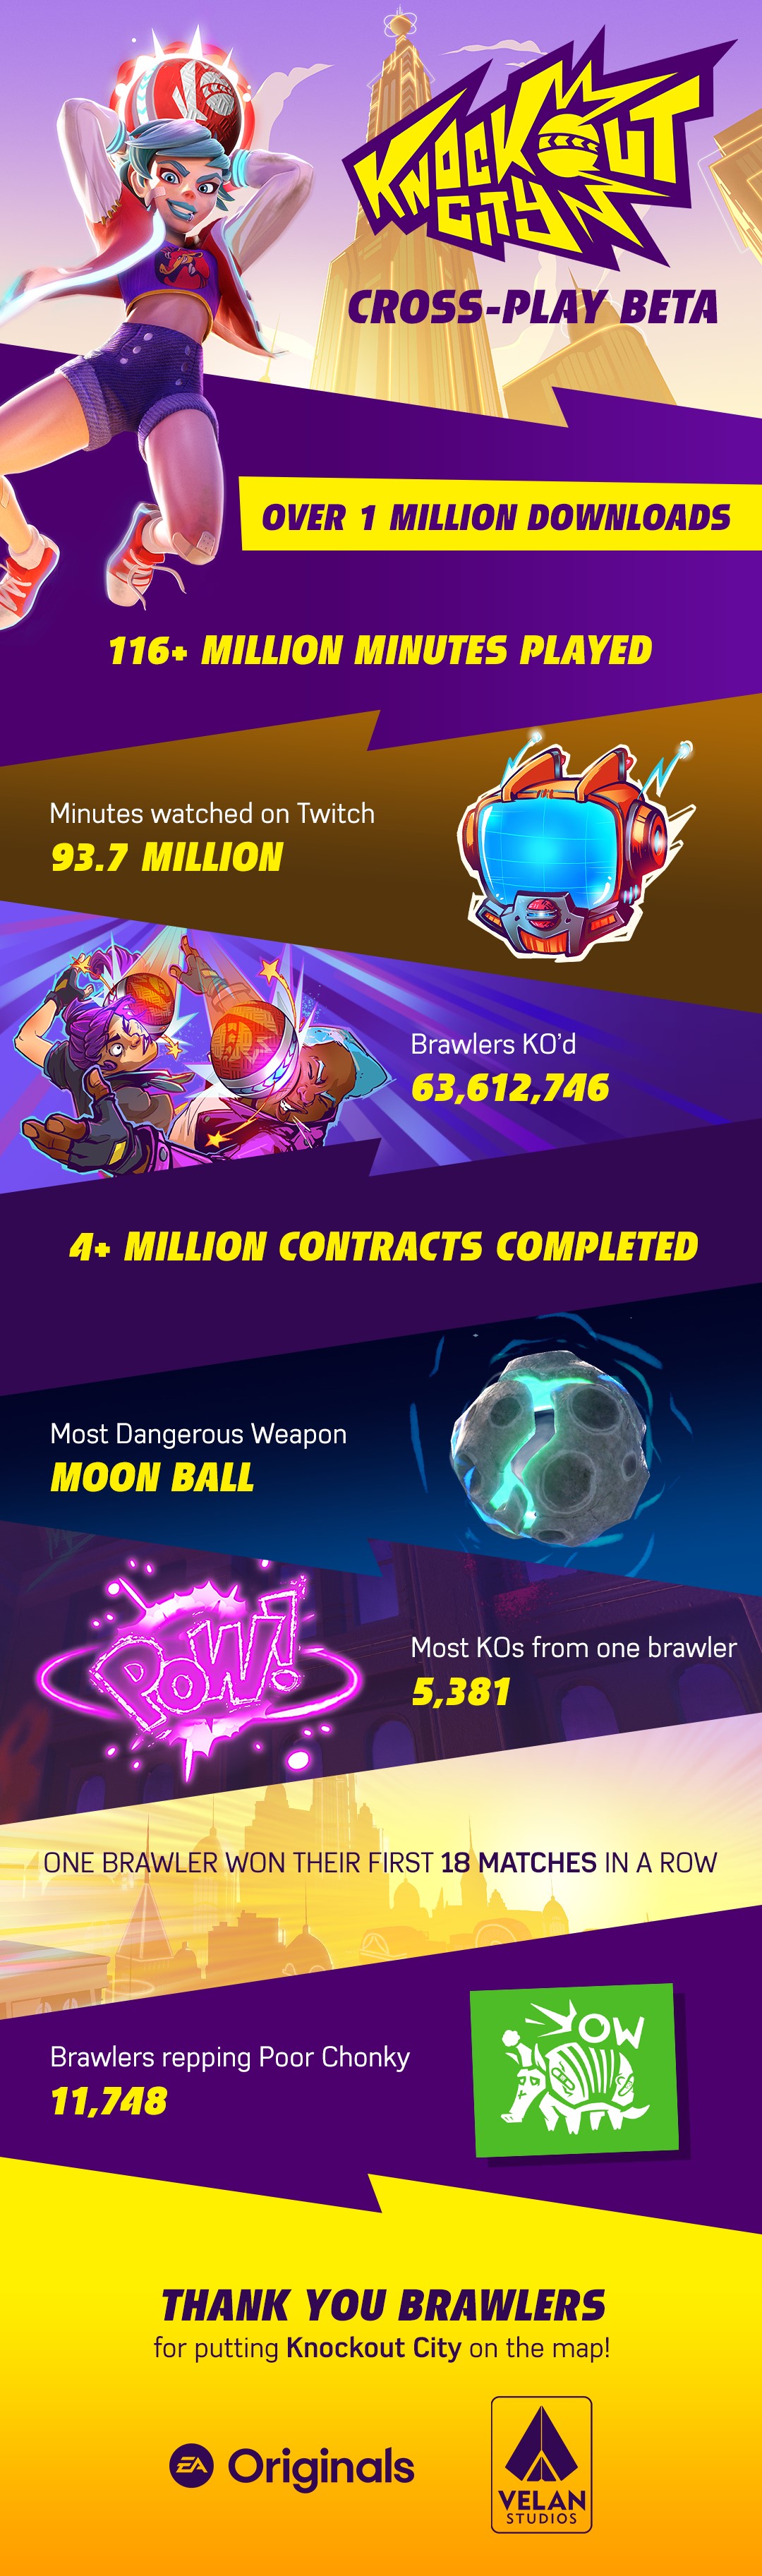 Knockout City Infographic CrossPlay Beta